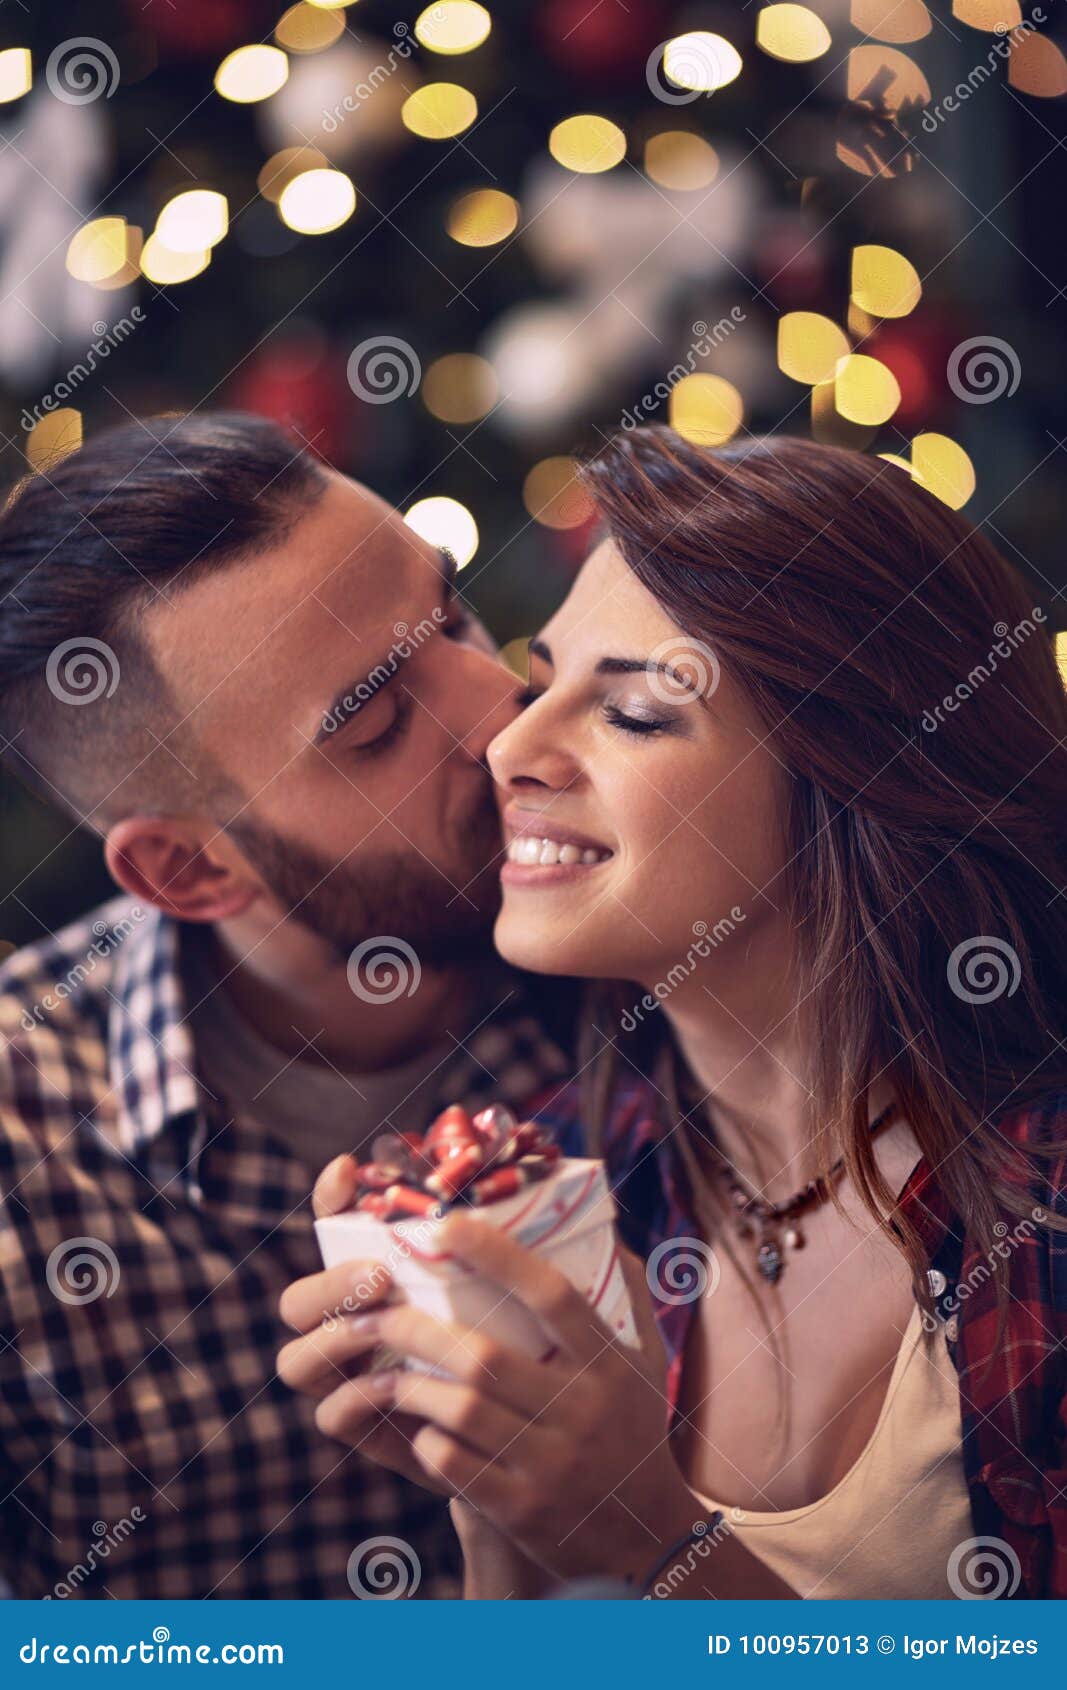 Featured image of post Kiss Images Gift - Lovely kissing images, sugar covered lips are good to kiss.